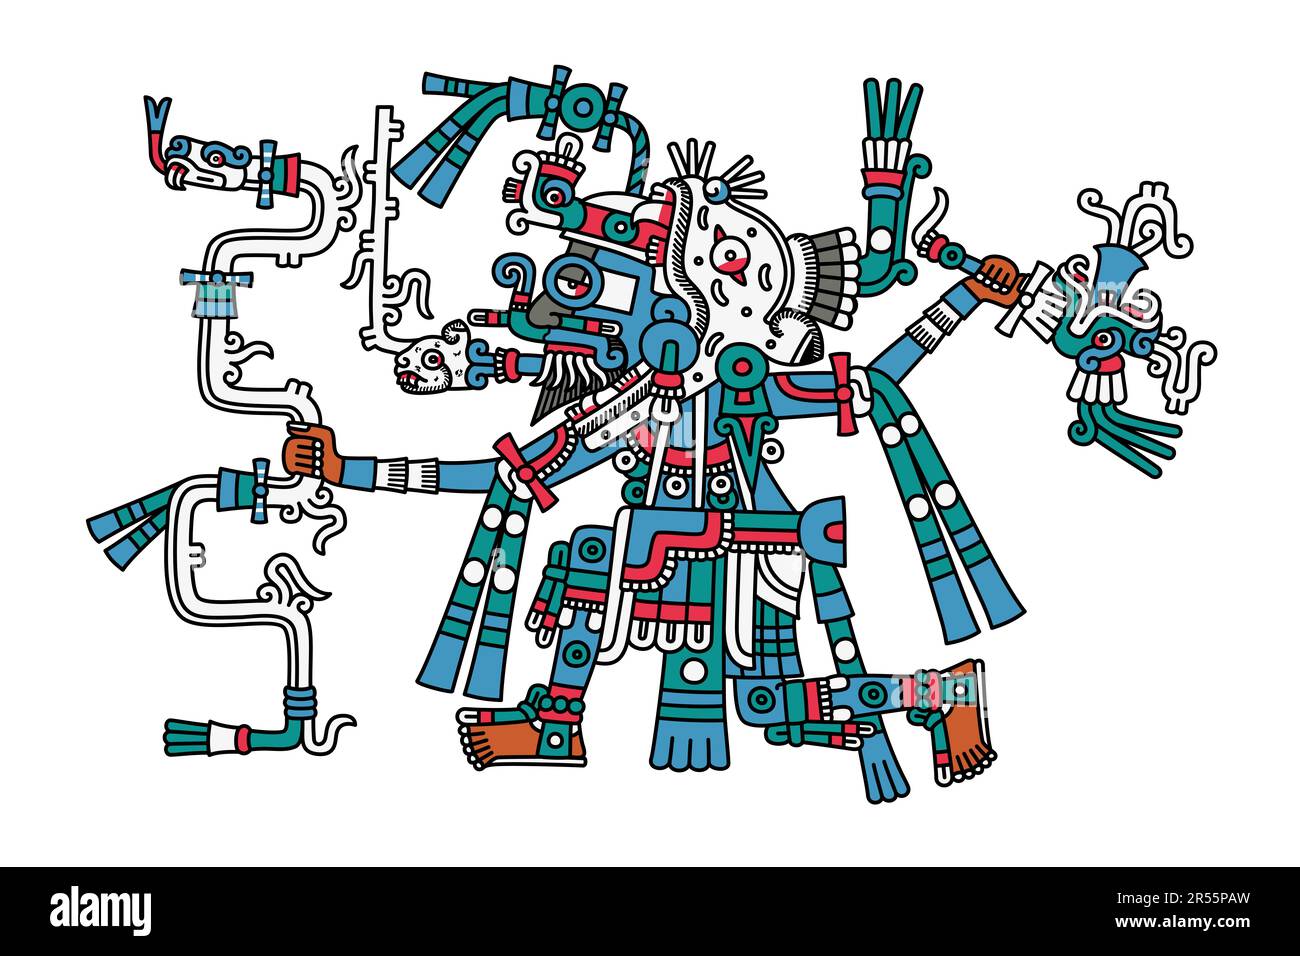 Tlaloc, Aztec god of lightning, rain and earthquake, deity of fertility and water. He is shown with blue skin and wearing a jaguar mask. Stock Photo